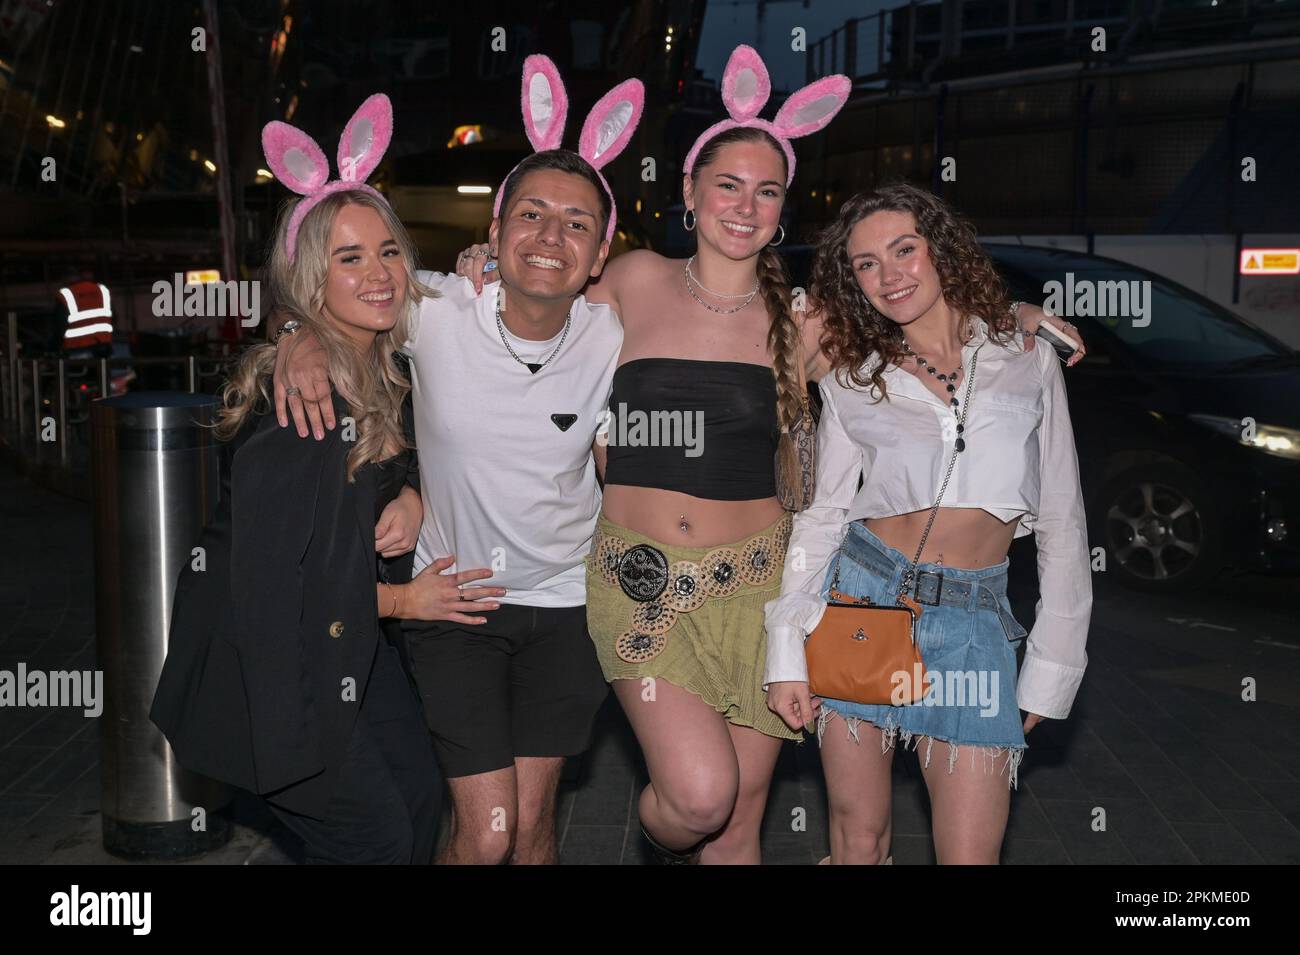 Birmingham city centre, 8th April 2023 - Revellers hit the town in Birmingham early on Saturday evening to continue the Easter Bank Holiday. Many of the party-goers wore pink and bunny ears whilst some swigged from a bottle of Lambrini. Ladies posed for a photo along with bouncers from Dirty Martini who expect Saturday to be a bumper night. Credit: Katie Stewart/Alamy Live News Stock Photo